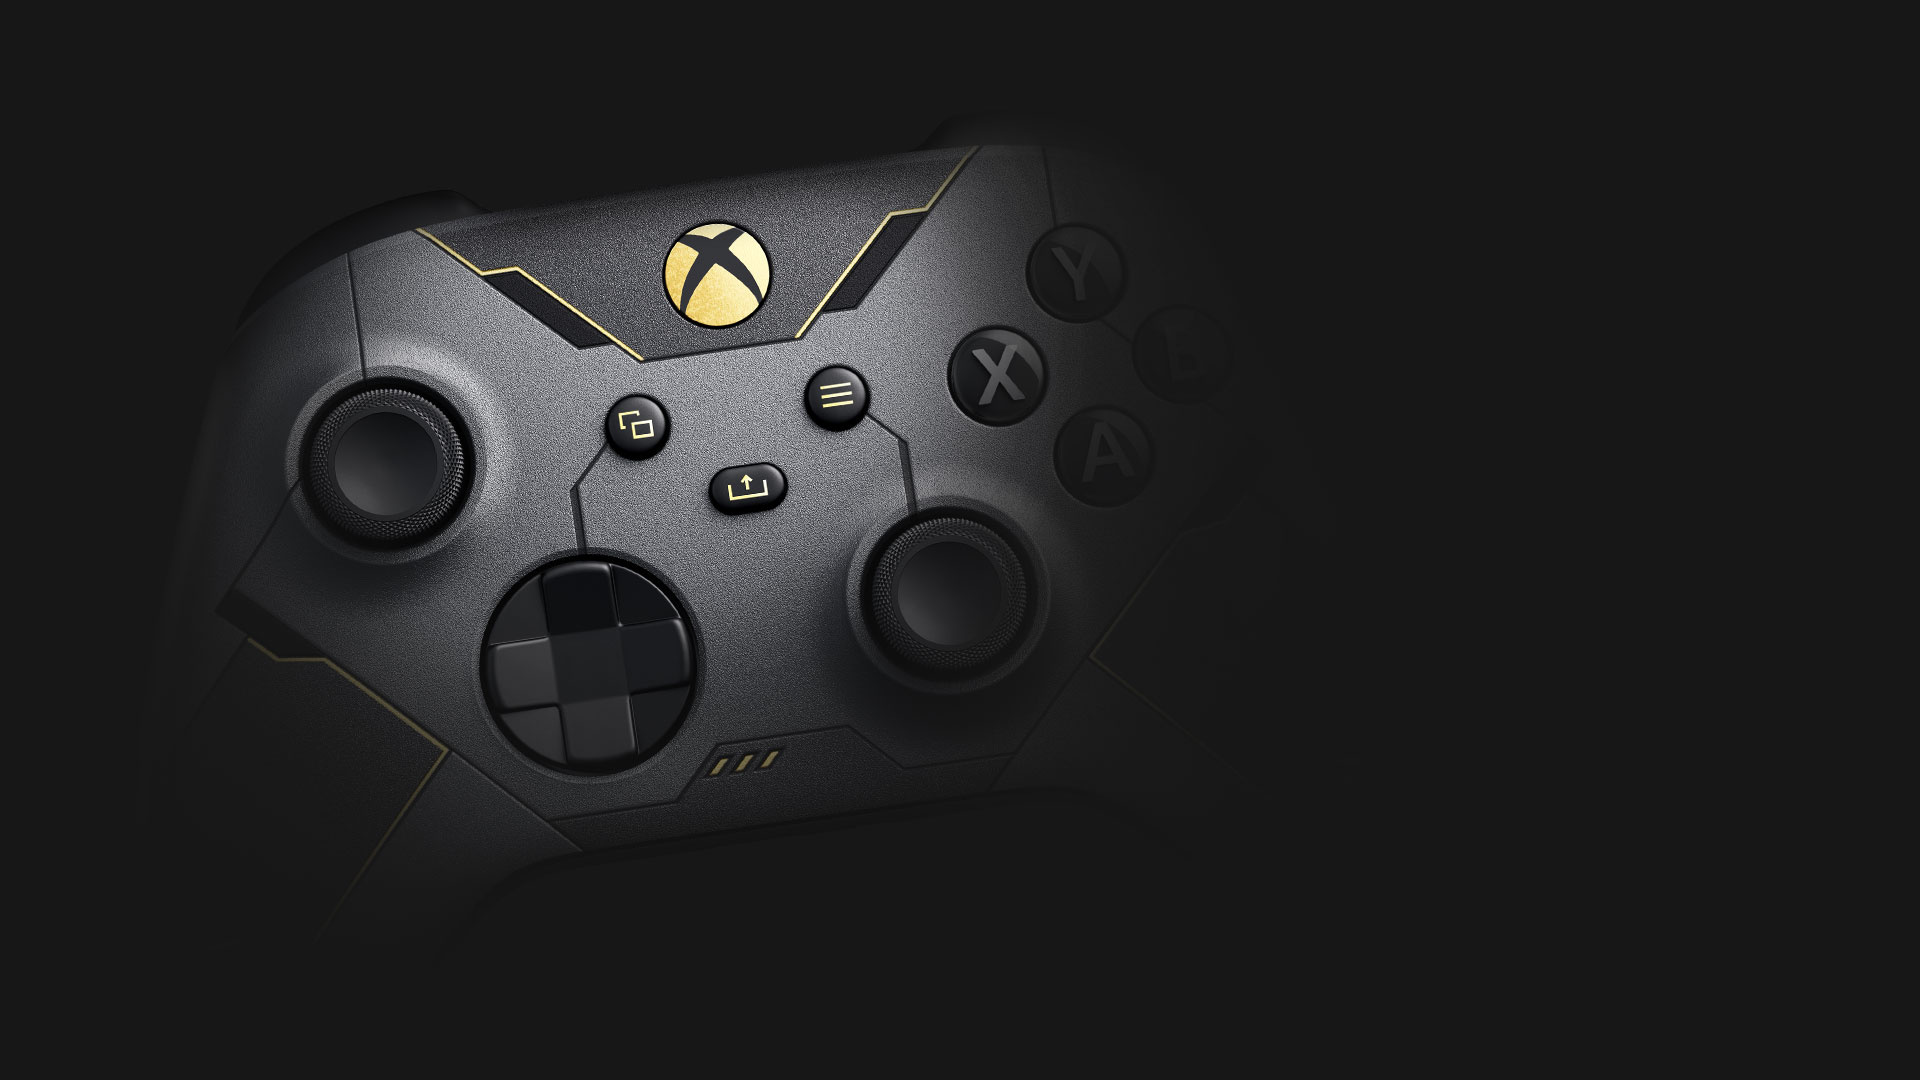 Xbox: Halo Infinite Limited Edition Bundle, Controller, Celebrating Halo’s 20th anniversary. 1920x1080 Full HD Background.